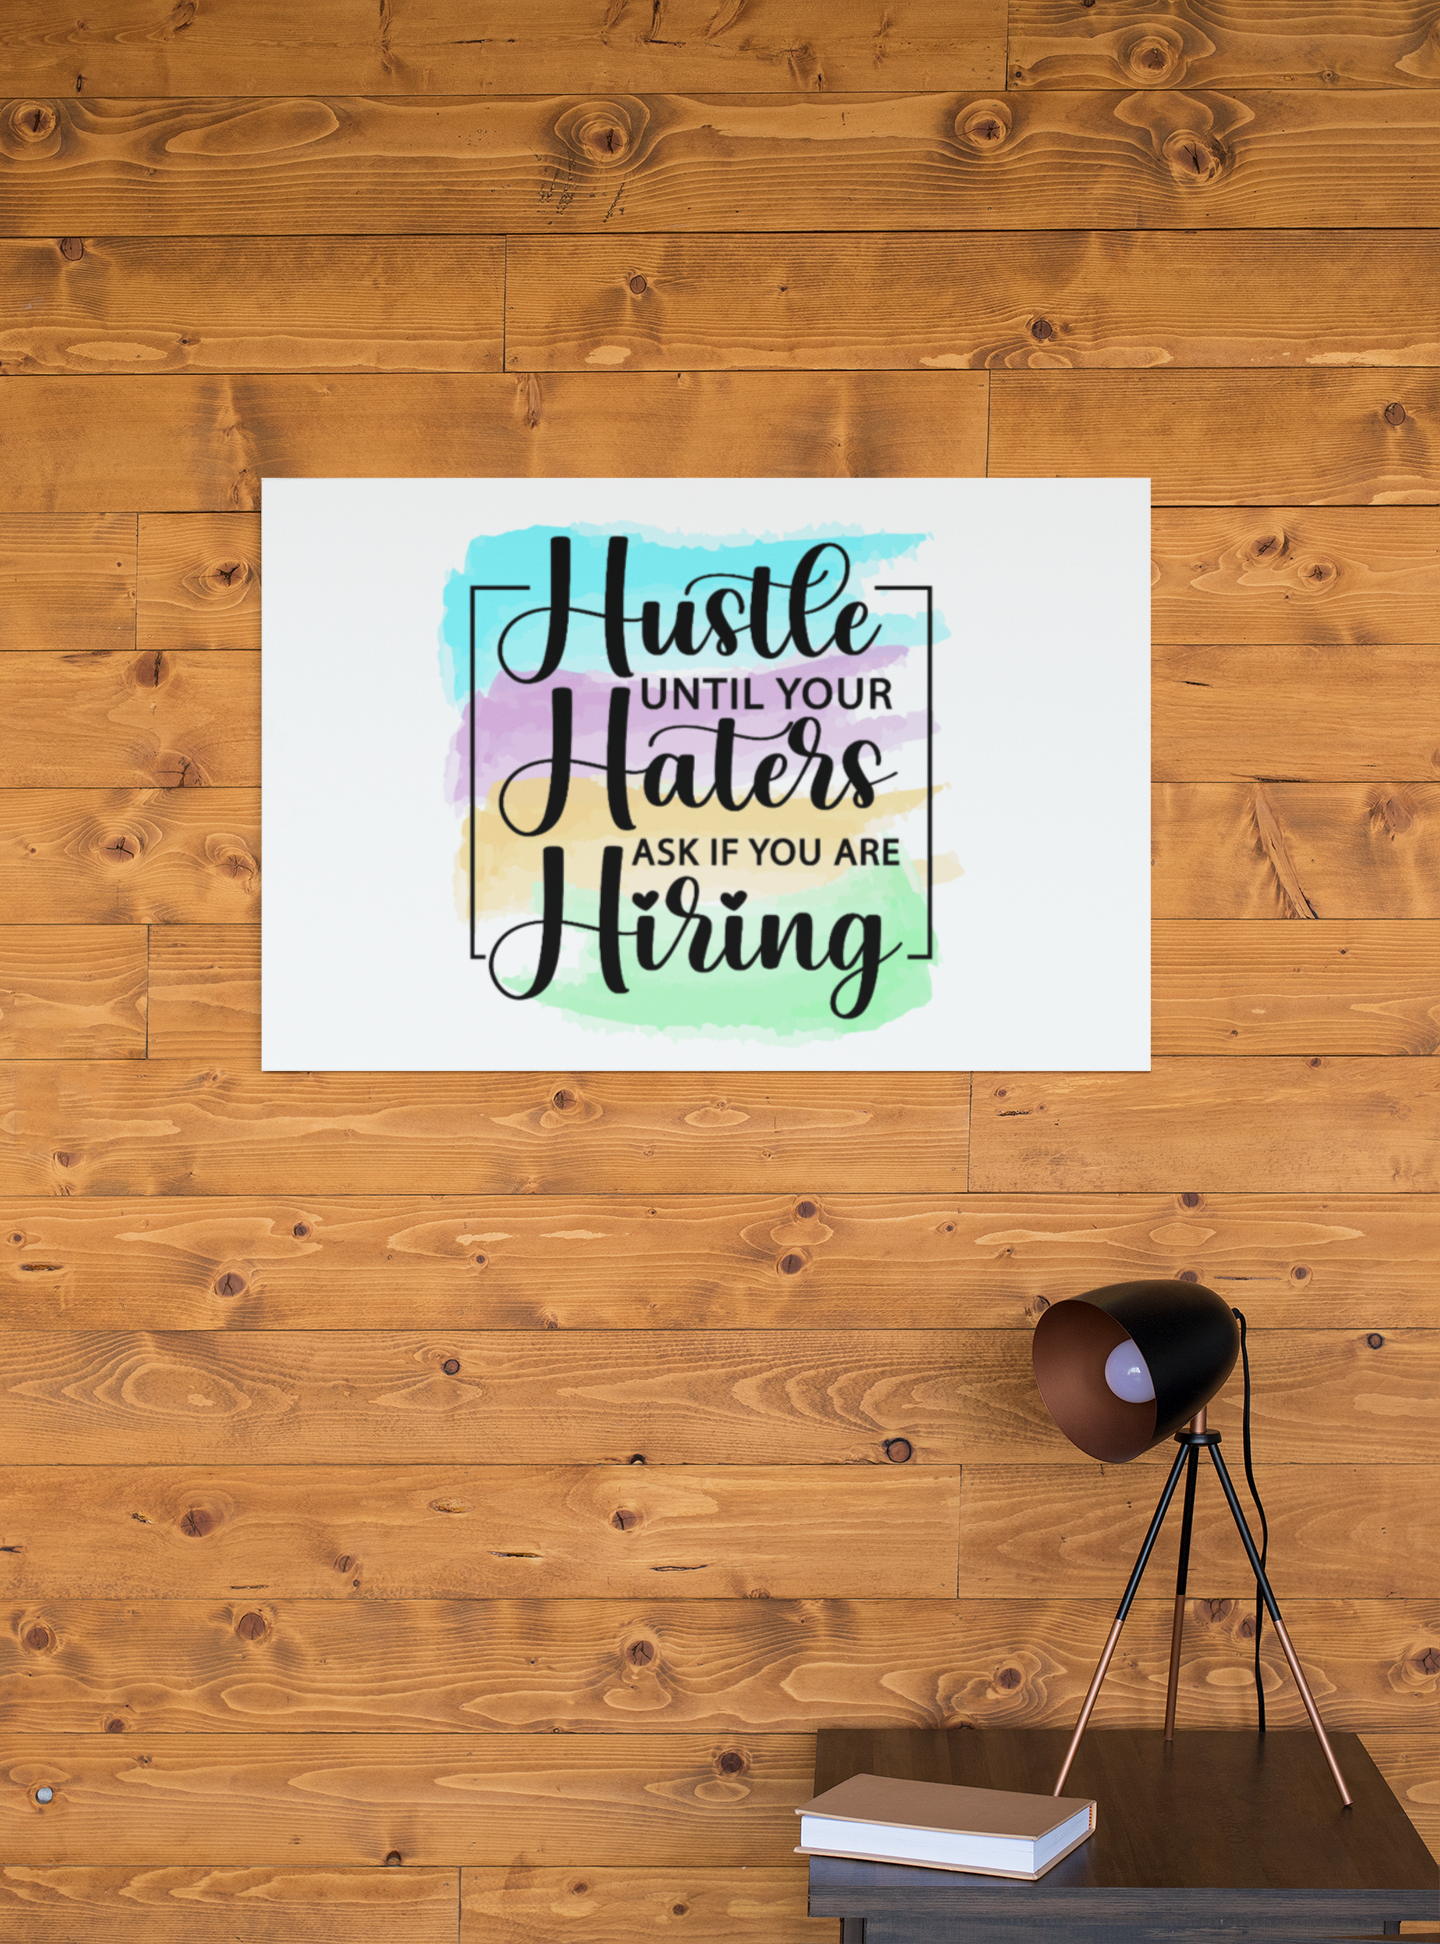 Hustle Haters Canvas